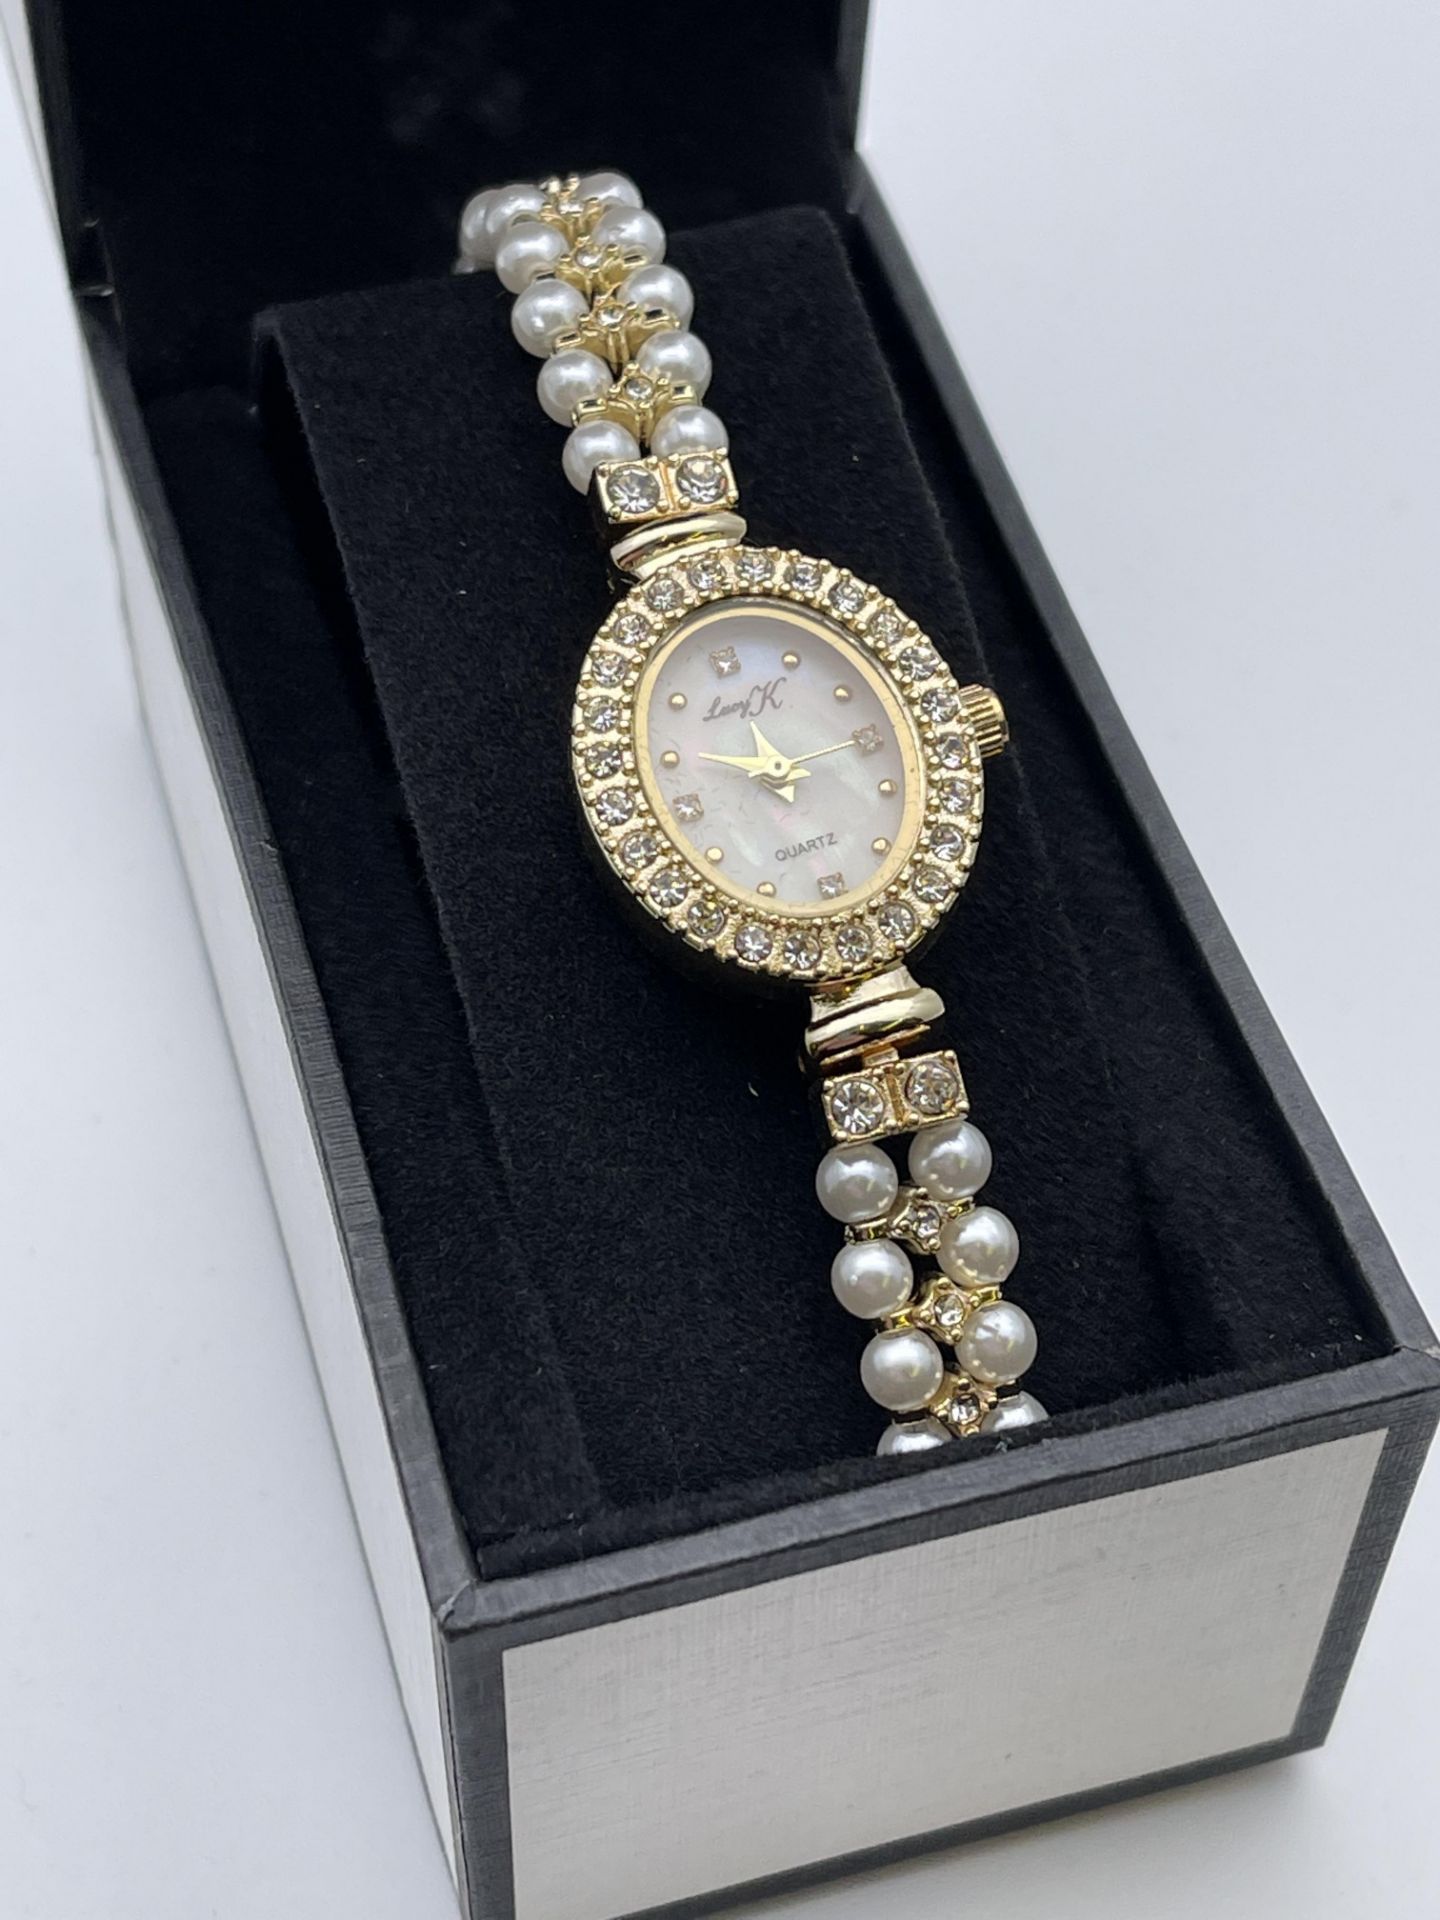 BOXED LUCY K LADIES DRESS WATCH, MOTHER OF PEARL EFFECT DIAL AND STRAP, APPEARS NEW, MAY NEED